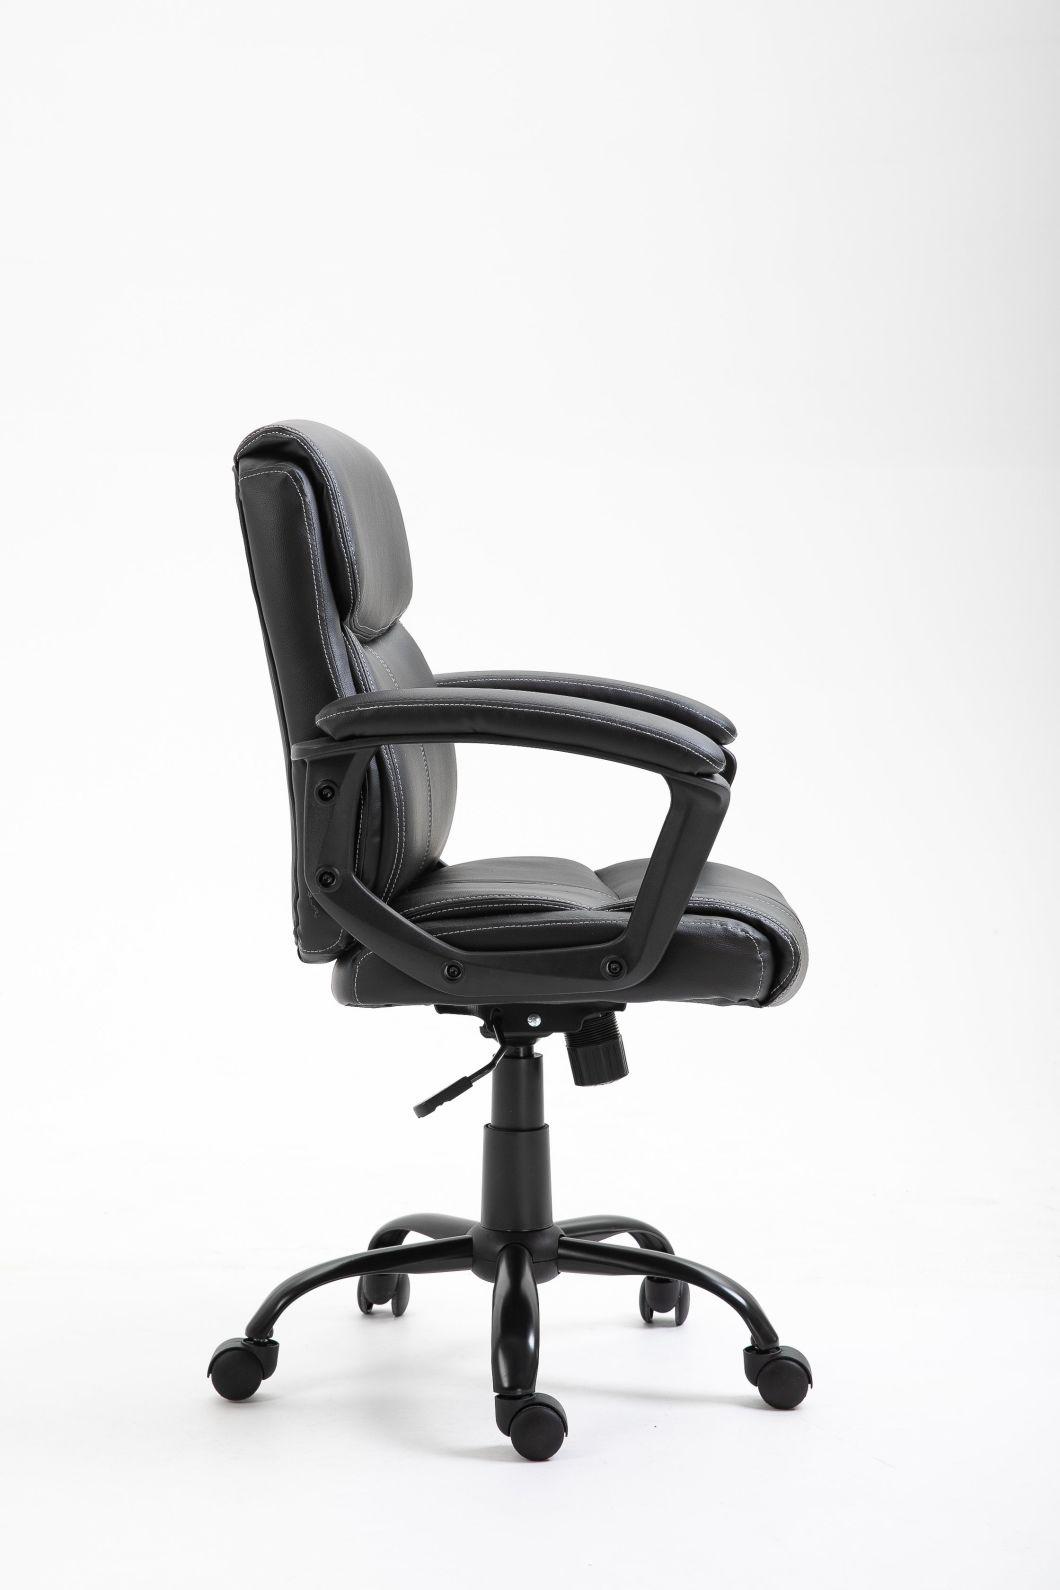 Armrest Leather Office Gaming Chair